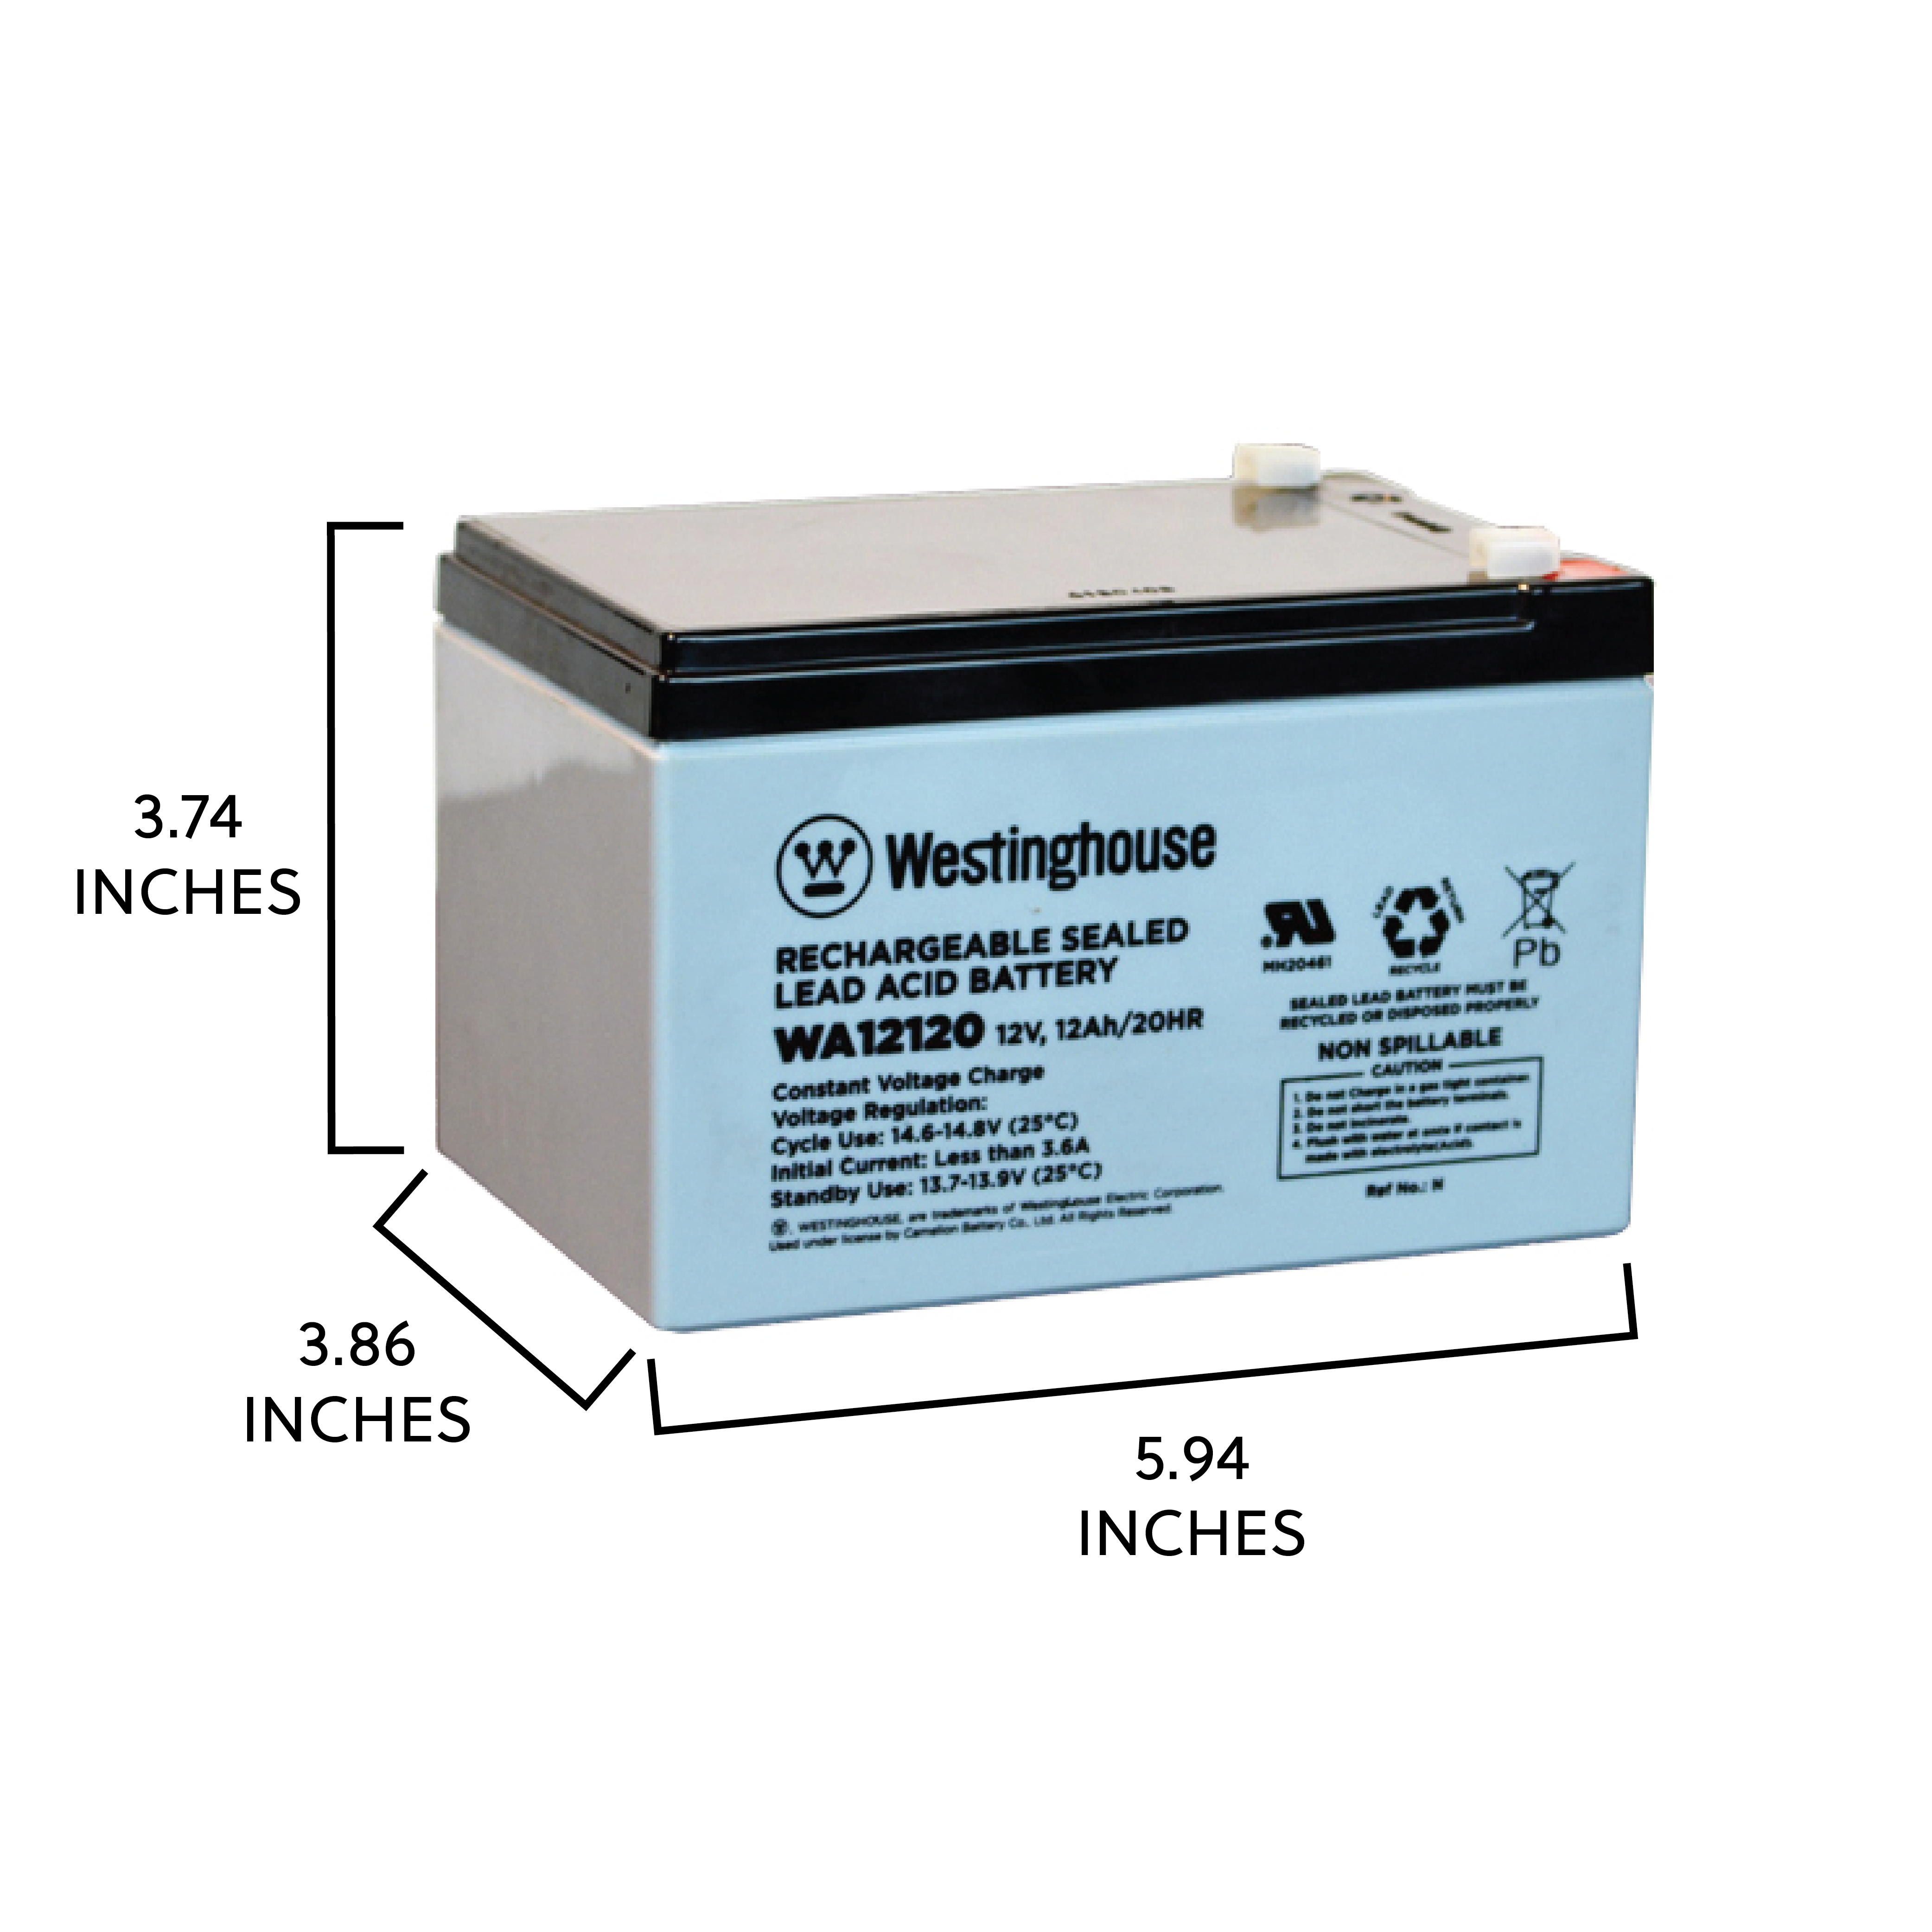 Westinghouse WA12120-F1, 12V 12Ah F1 Terminal Sealed Lead Acid Rechargeable Battery